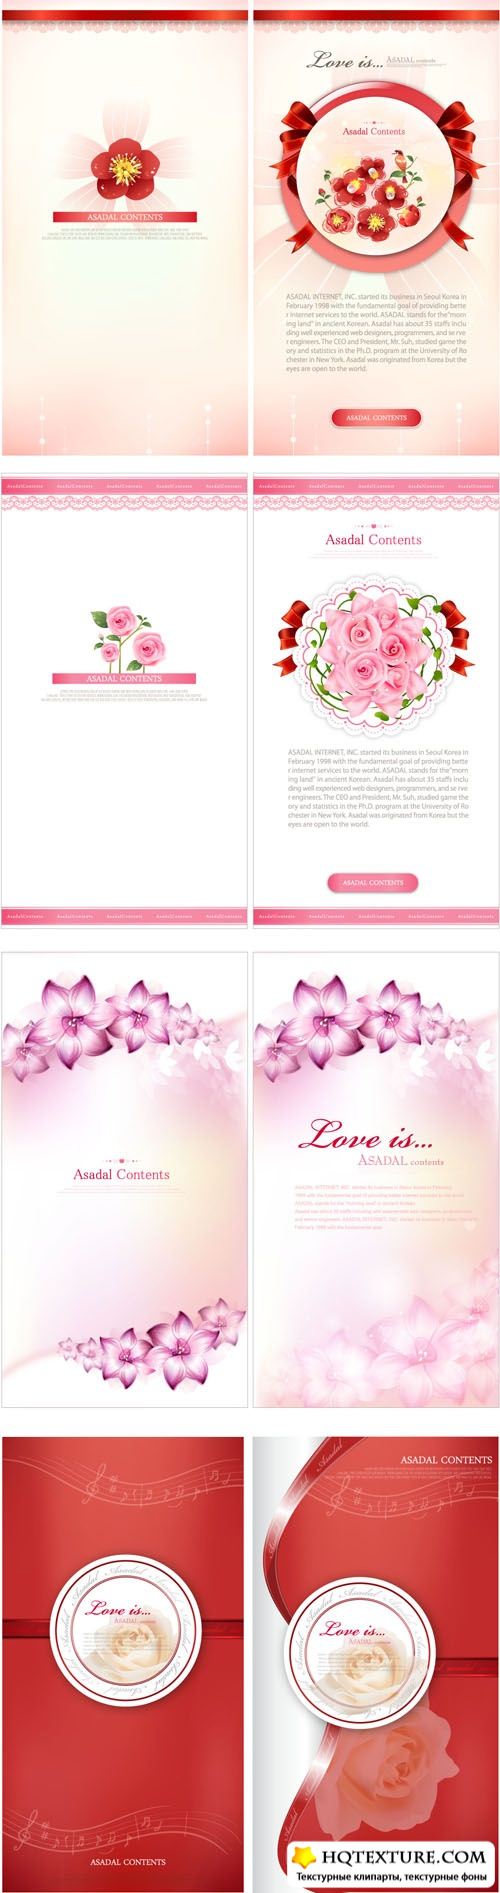 Romantic backgrounds and cards 2